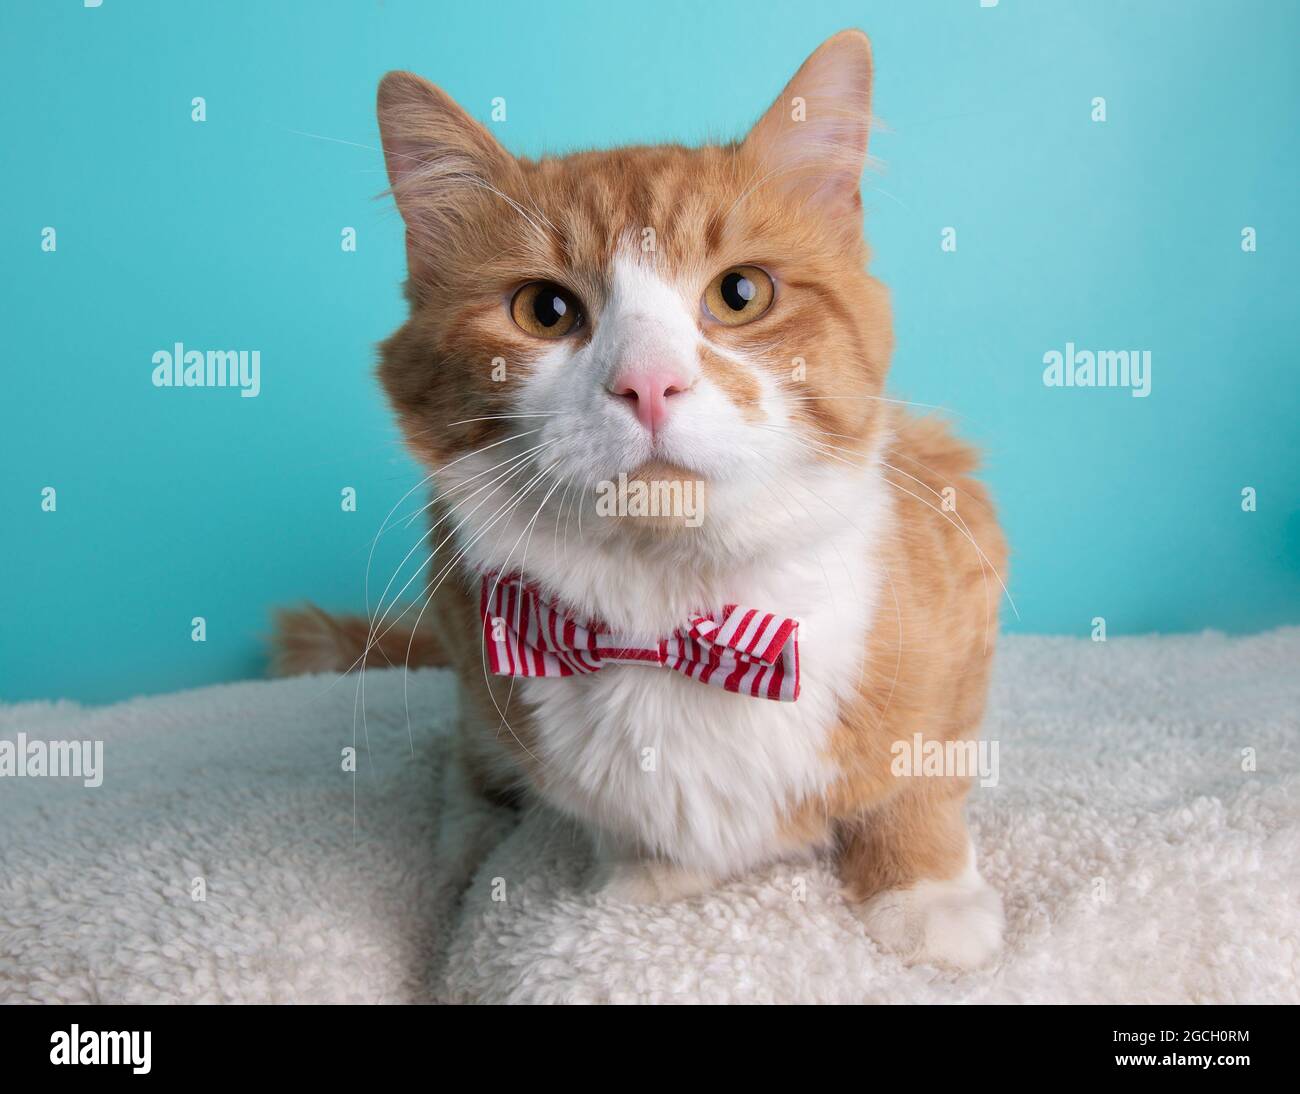 White and orange cat wearing red striped bow tie lying down portrait on blue background Stock Photo